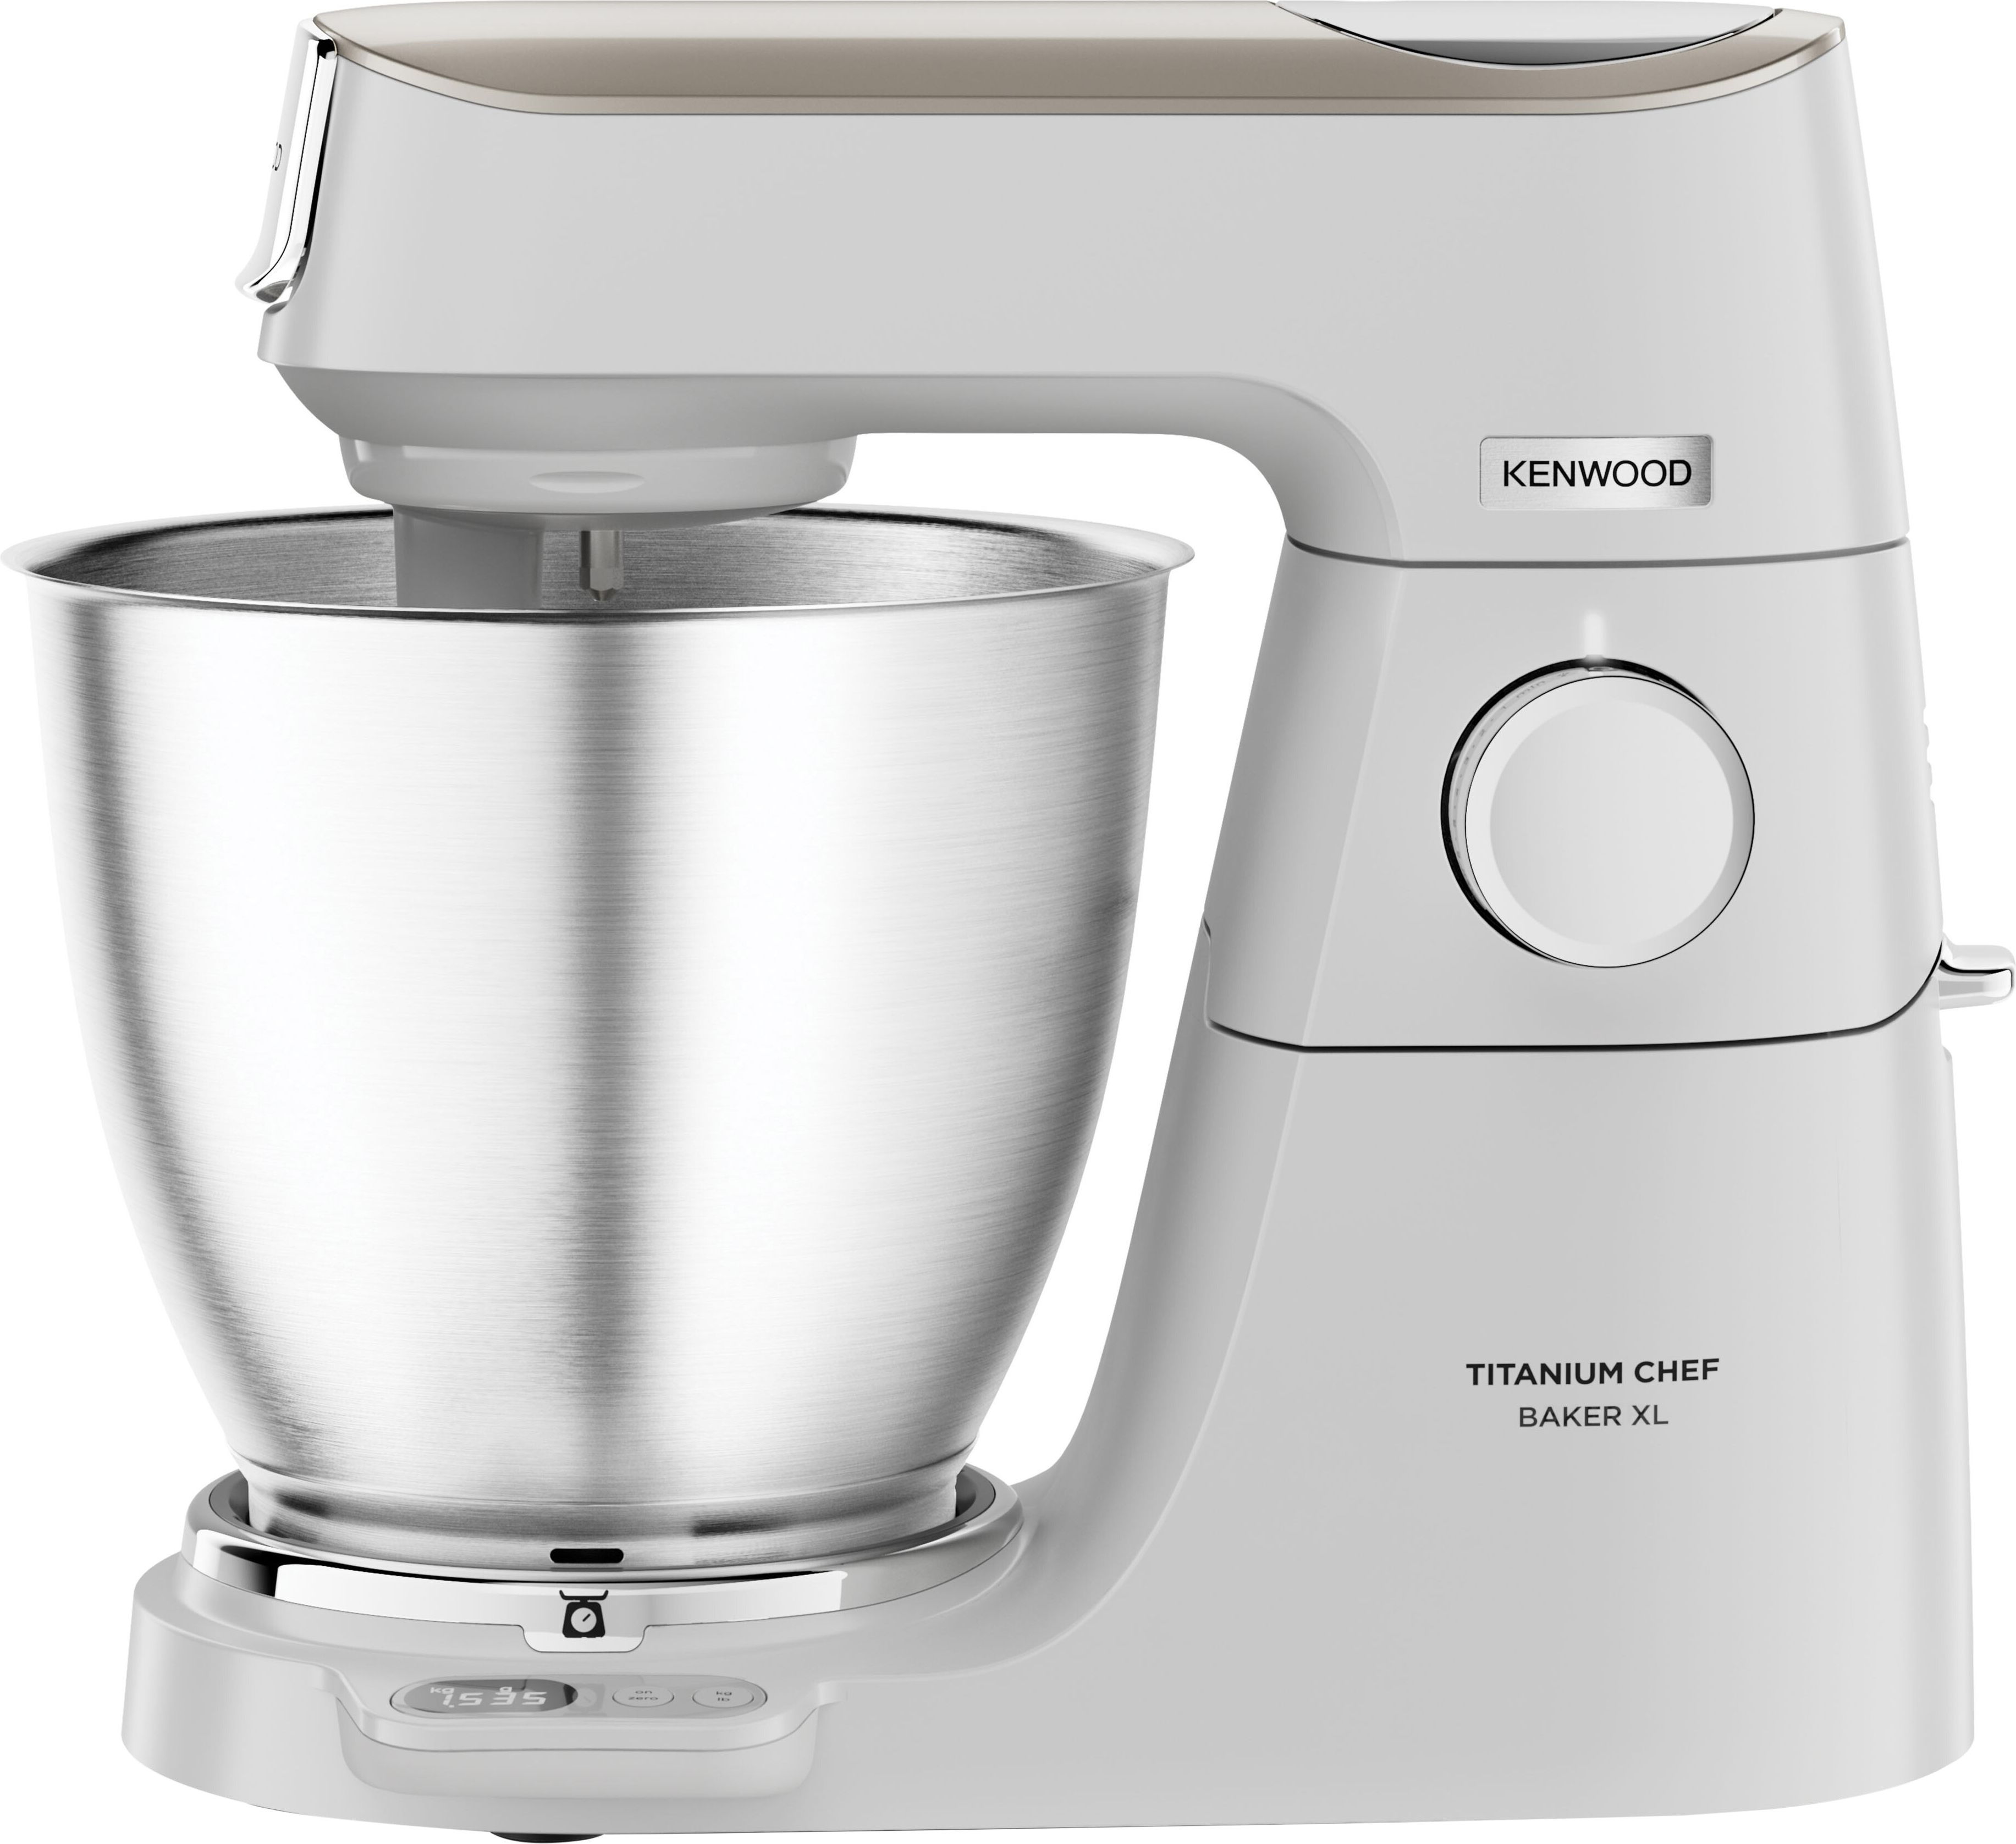 Kenwood Chef KVL65.001WH Stand Mixer with 6.7 Litre Bowl - White, White